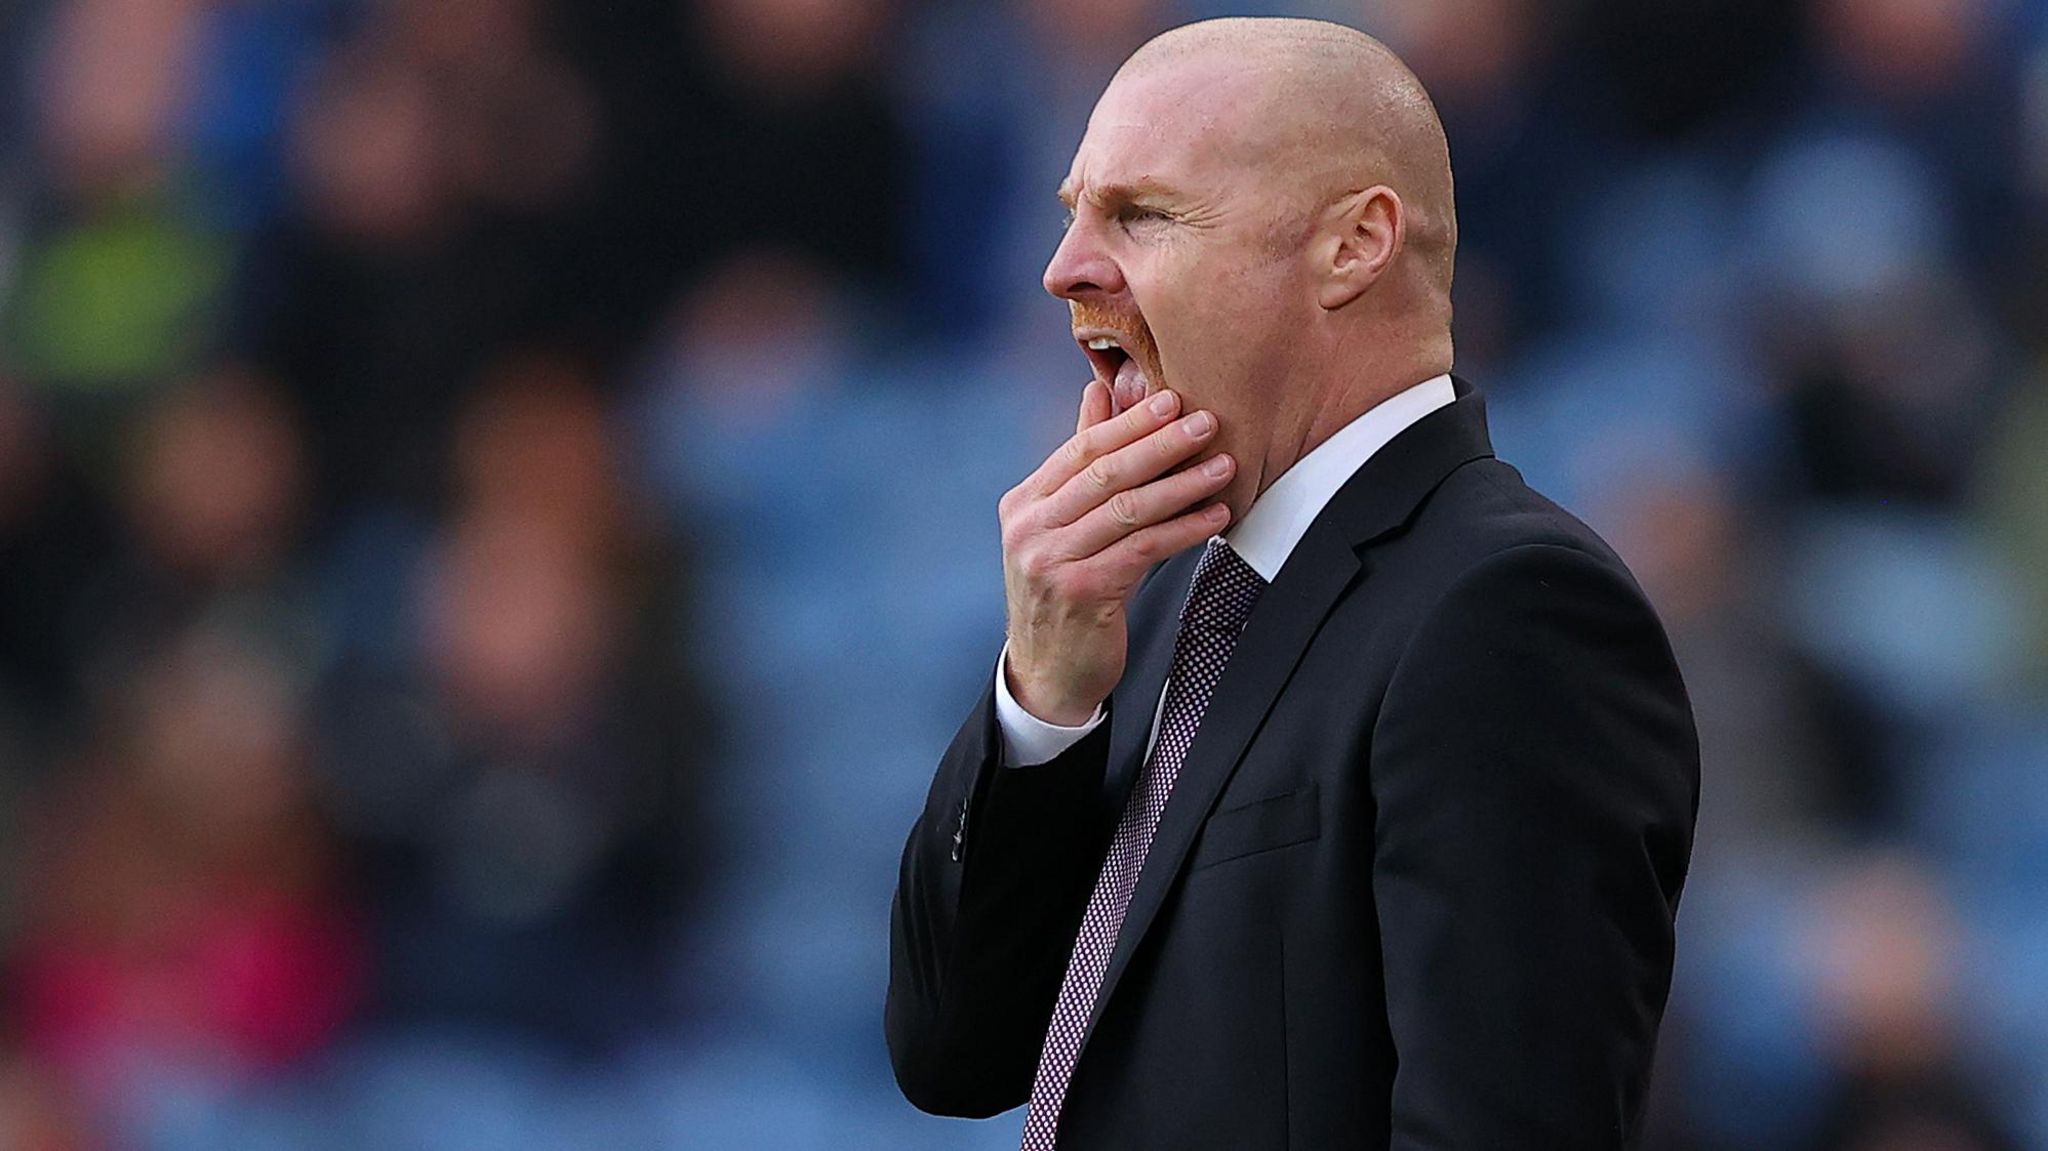 Player welfare 'off the scale' - Dyche - BBC Sport